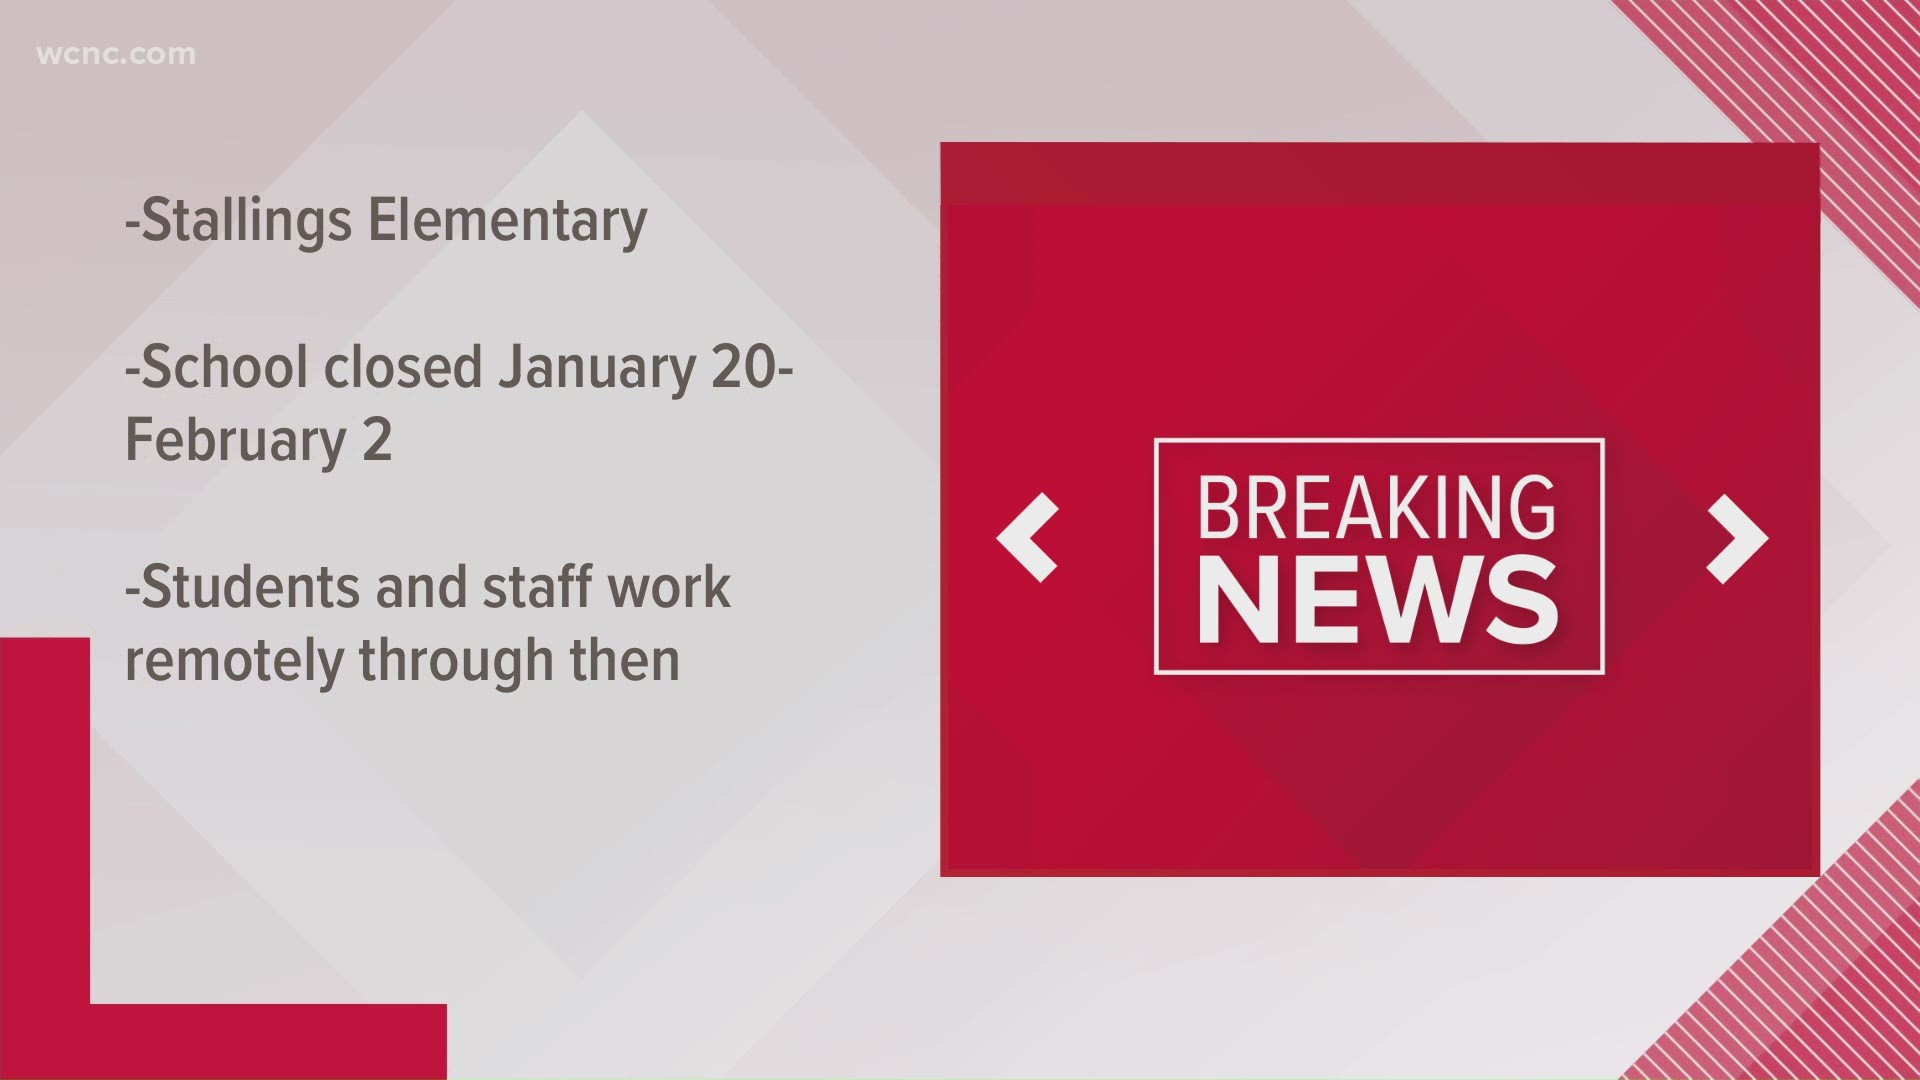 Students and staff will work remotely until Feb. 2nd.